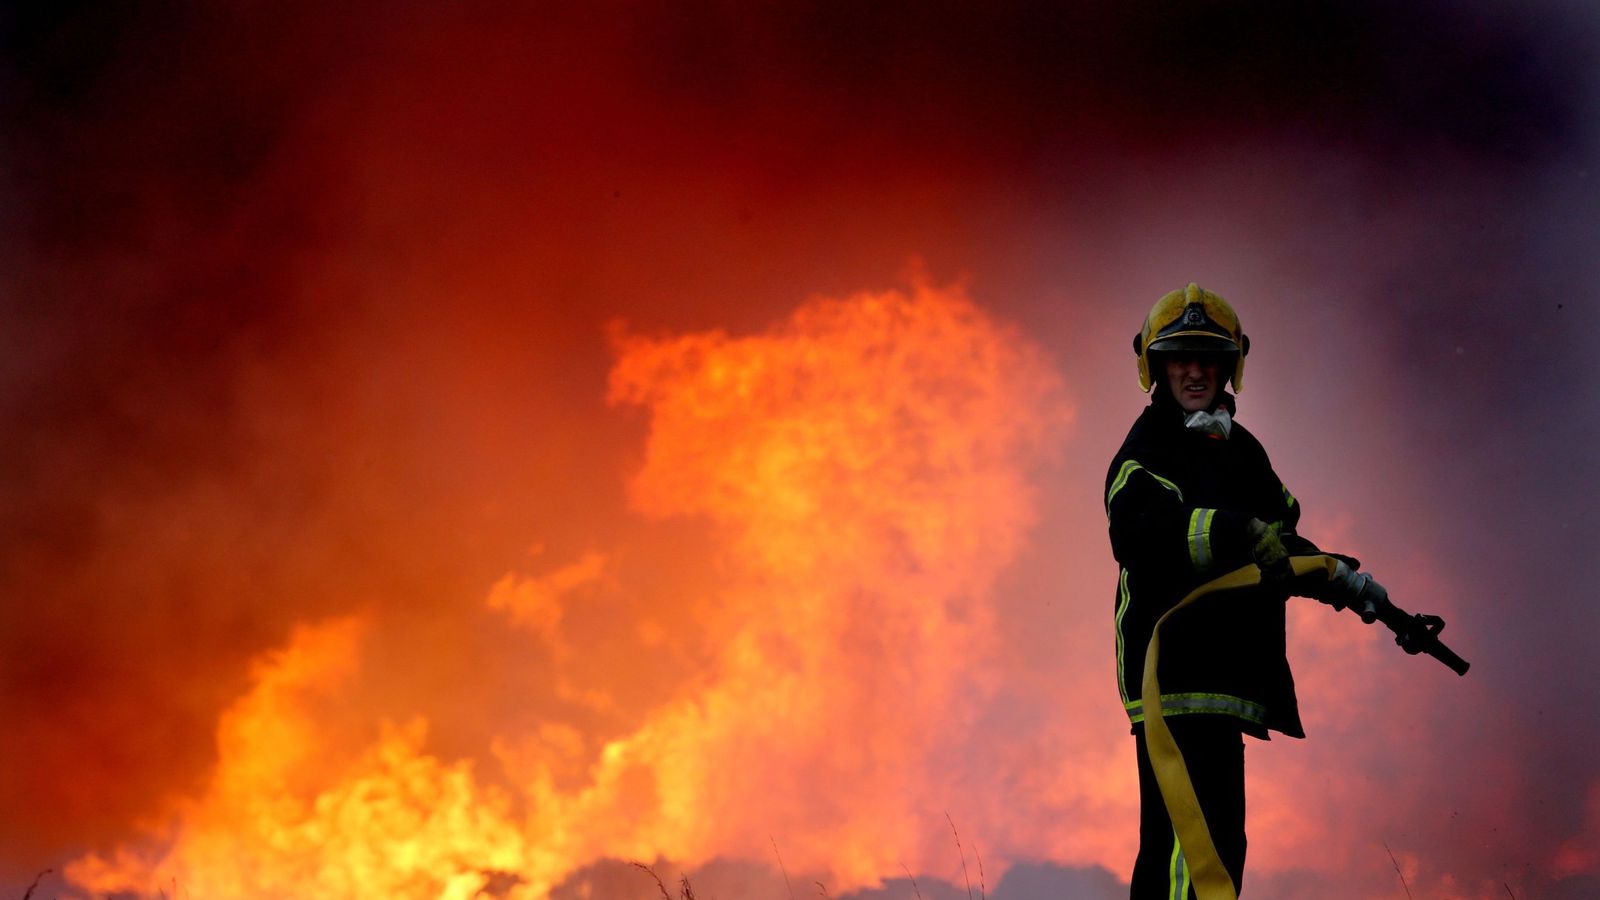 Firefighters blame cuts for 15 increase in firerelated deaths